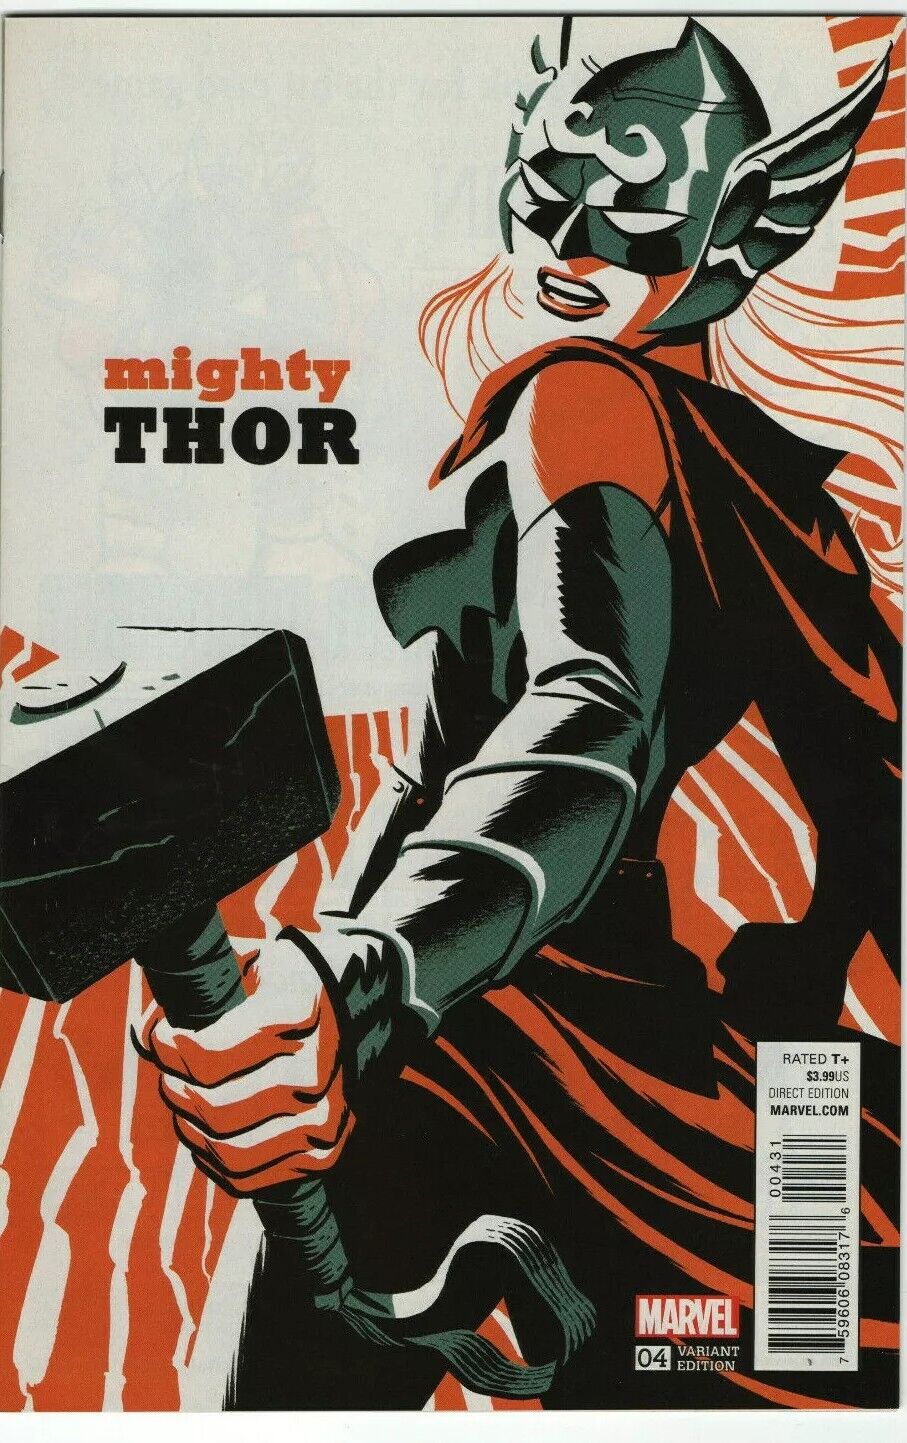 MIGHTY THOR #4 2015 MARVEL COMICS MICHAEL CHO 1:20 VARIANT JANE FOSTER 